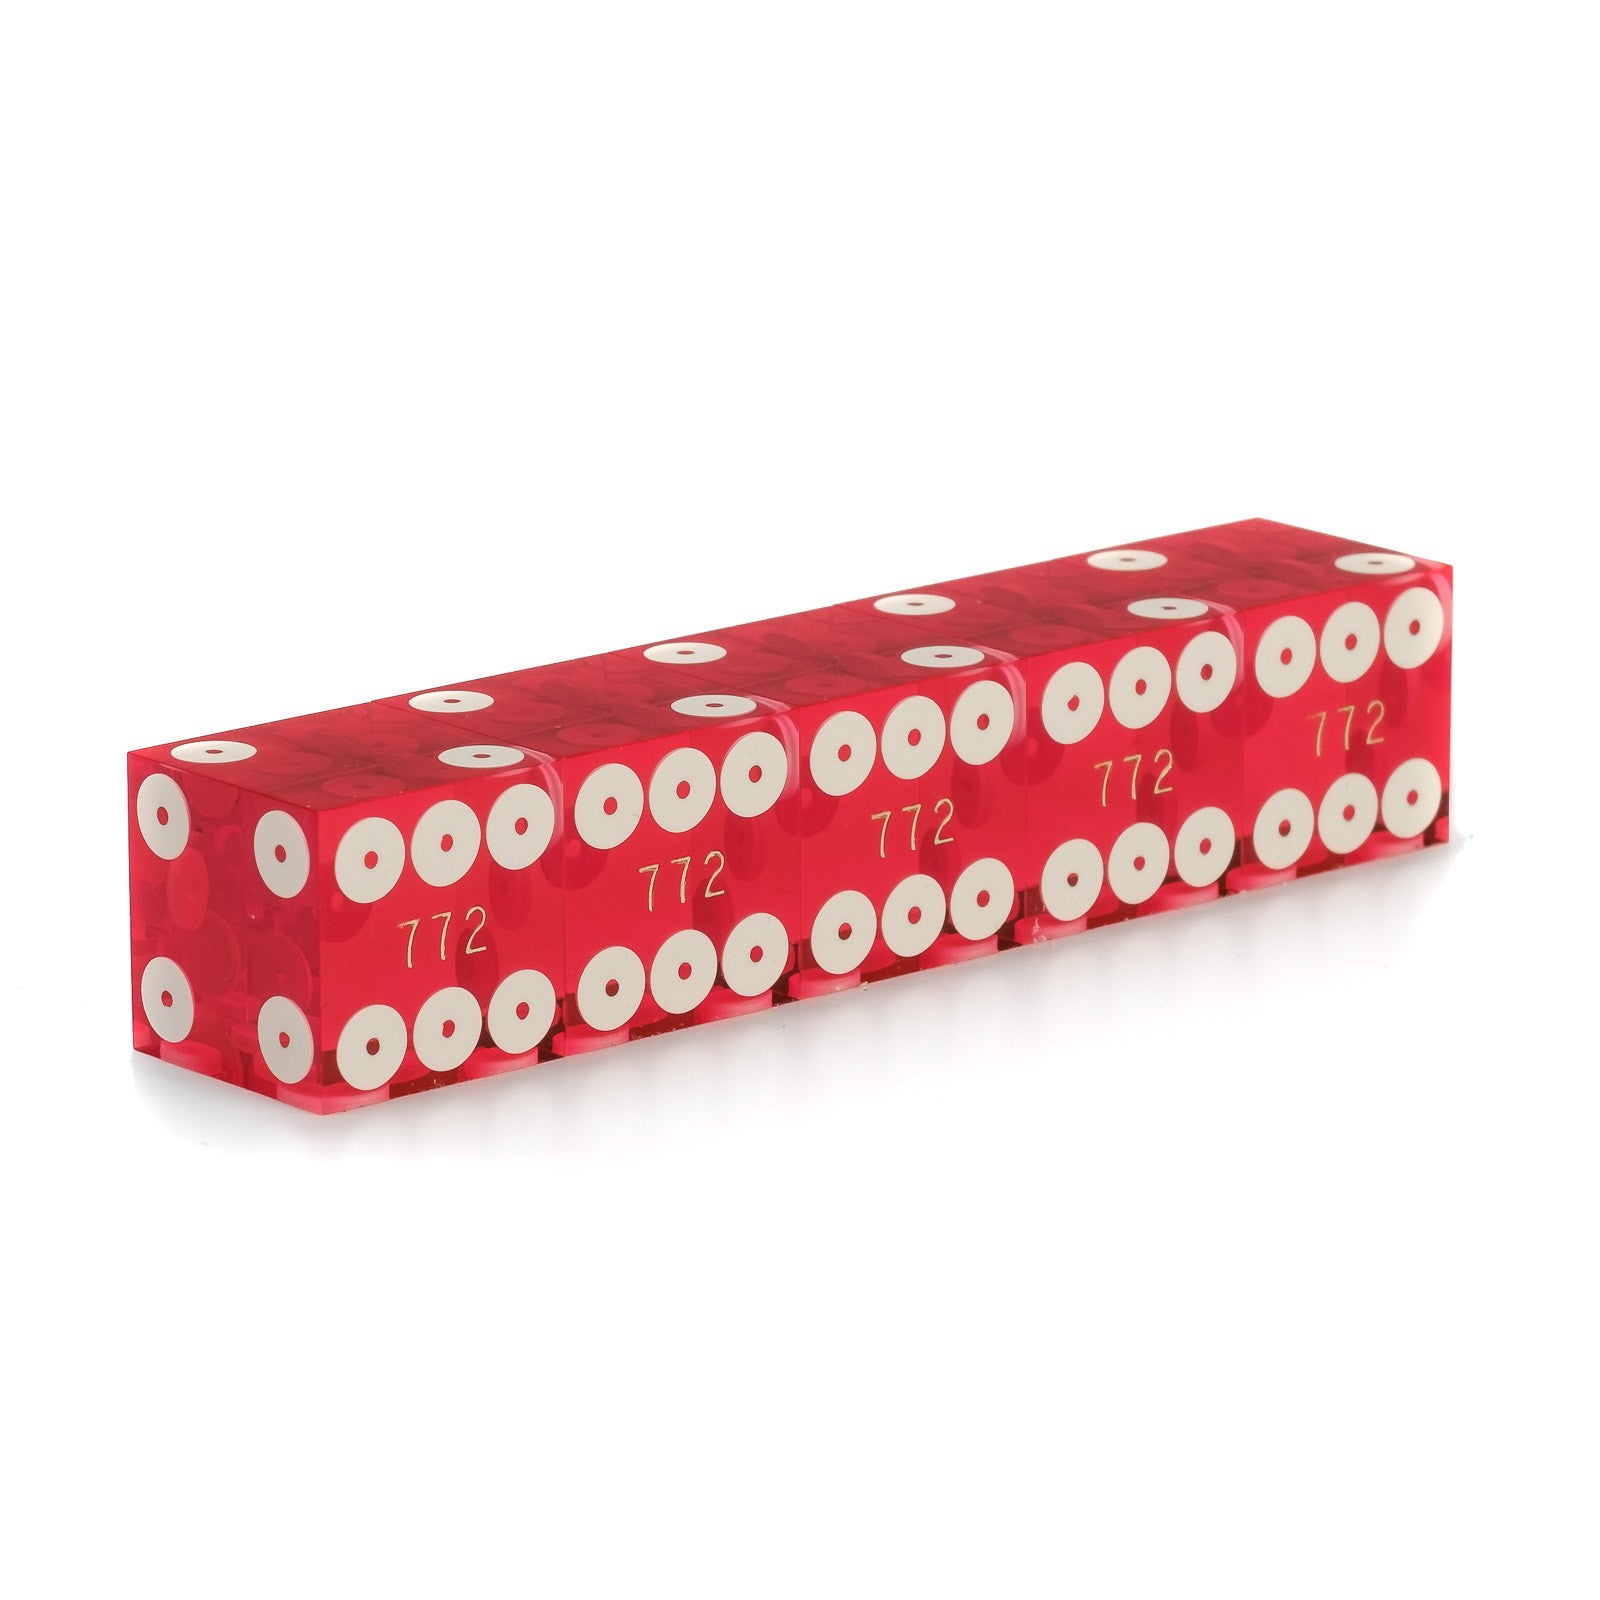 Real Casino Dice For Sale